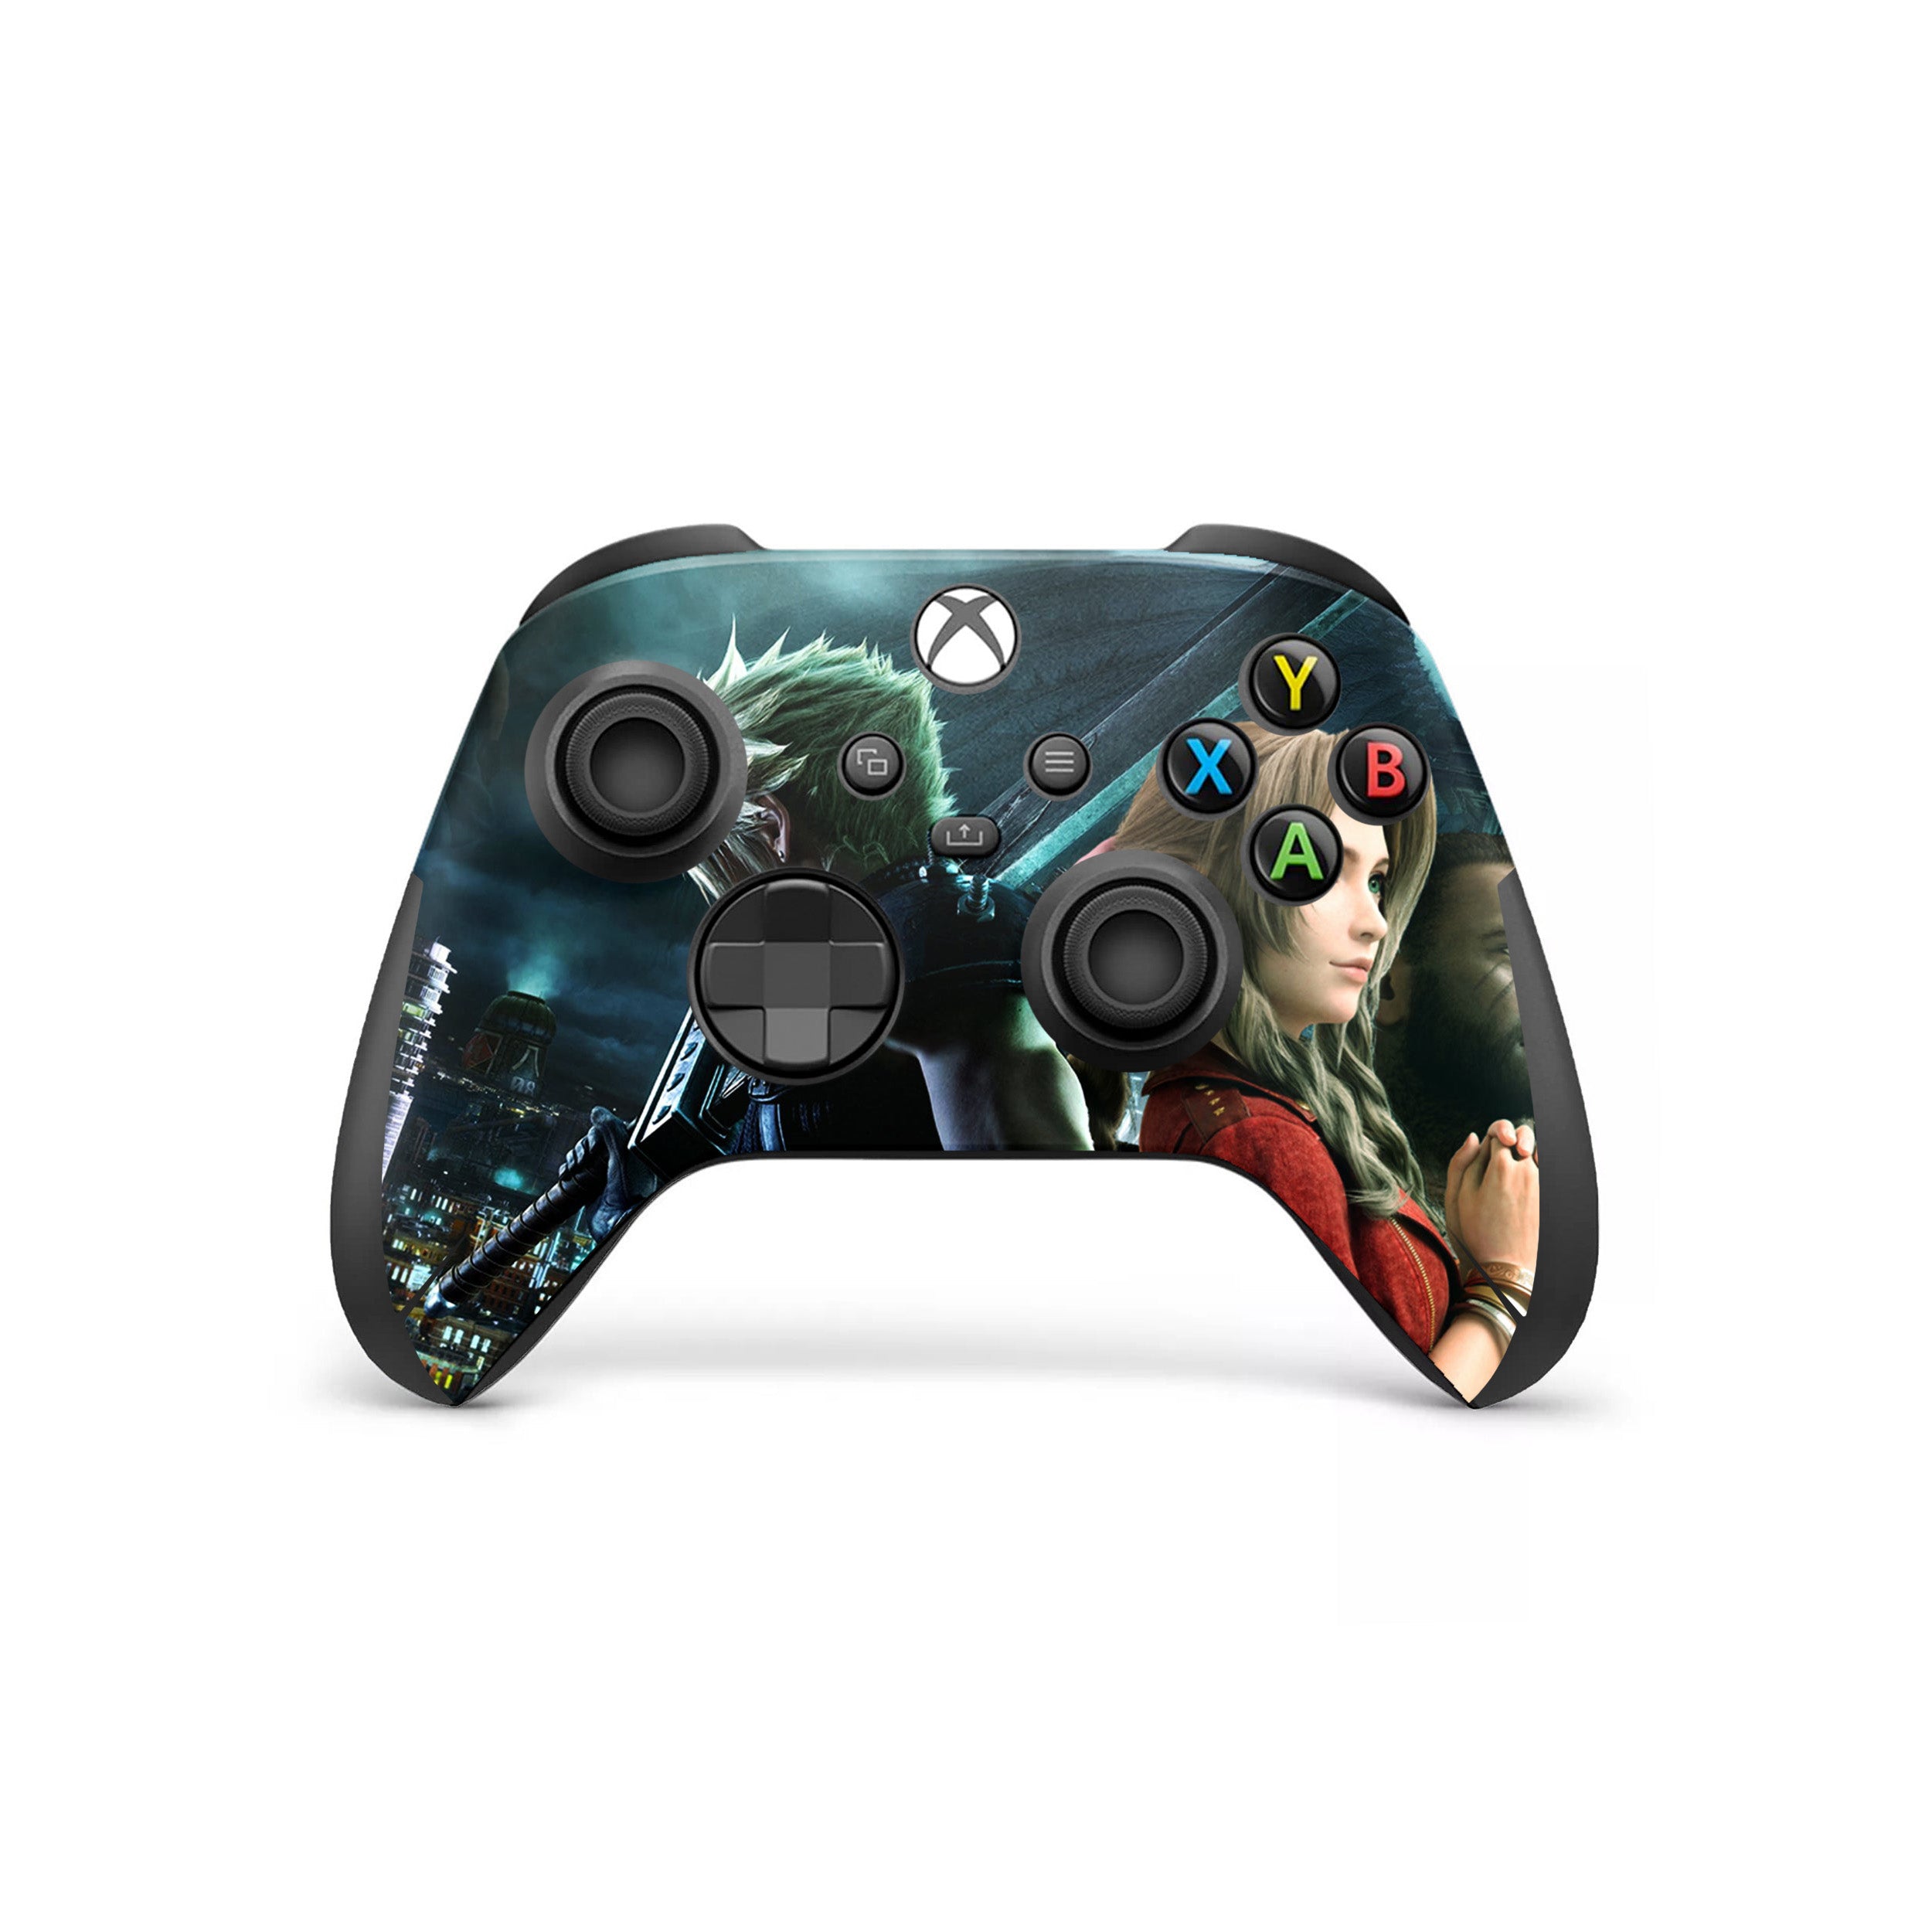 A video game skin featuring a Final Fantasy 7 Group design for the Xbox Wireless Controller.